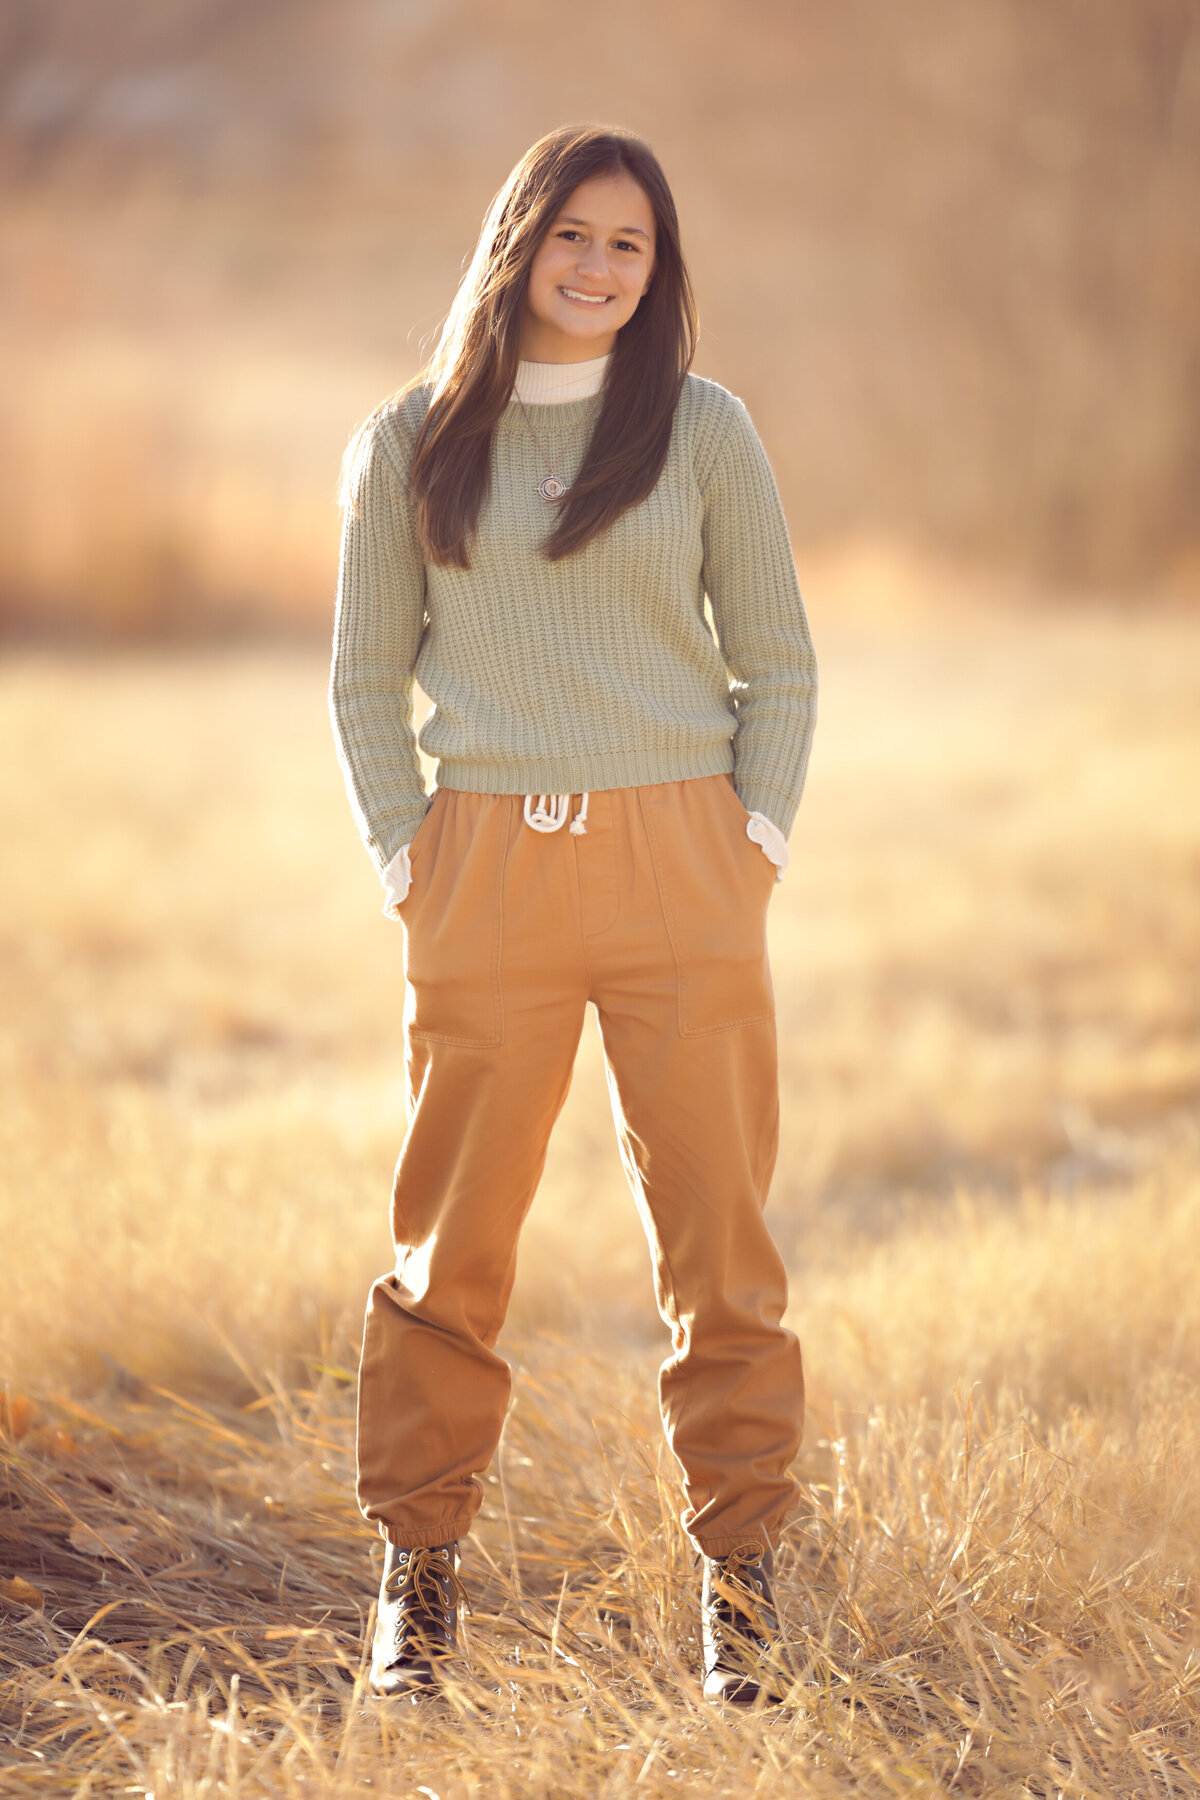 Family-Photos-photography-photographer-yvonne-min-girl-teen-stylish-field-outside-natural-light-golden-hour-sunset-boulder-thornton-denver-north-colorado-arvada-northglenn-westminster-broomfield-daughter-sweater-images-canon-portraits-72.jpg